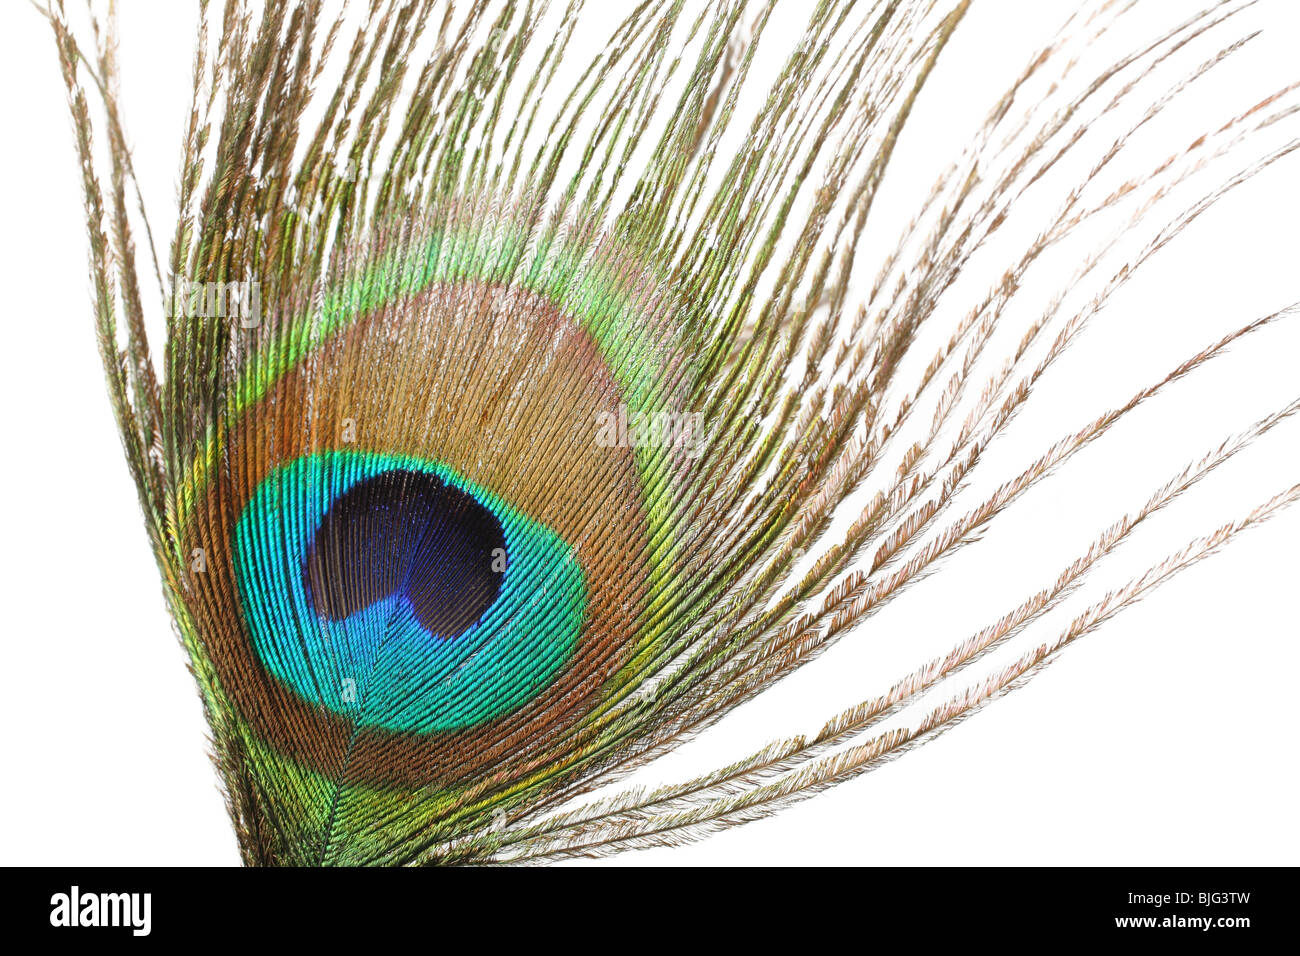 close-up of a single brightly colored peacock feather cutout Stock Photo